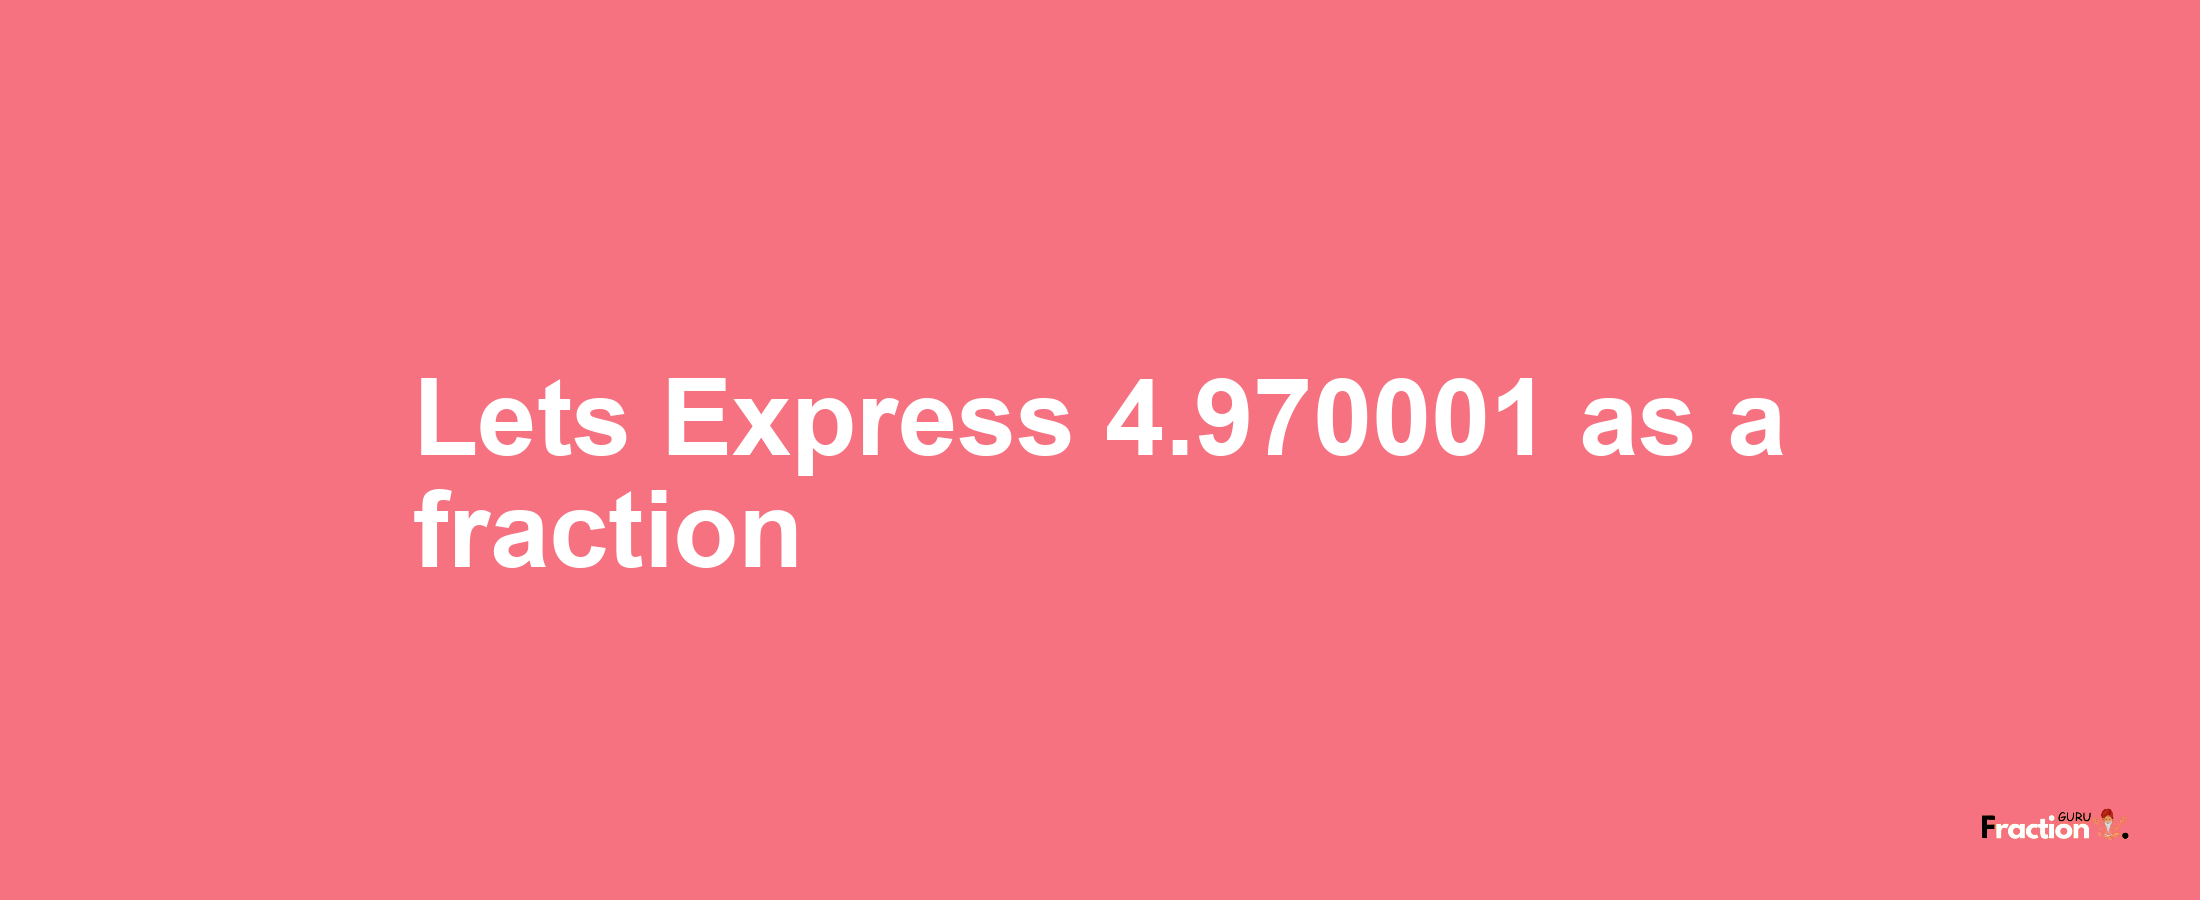 Lets Express 4.970001 as afraction